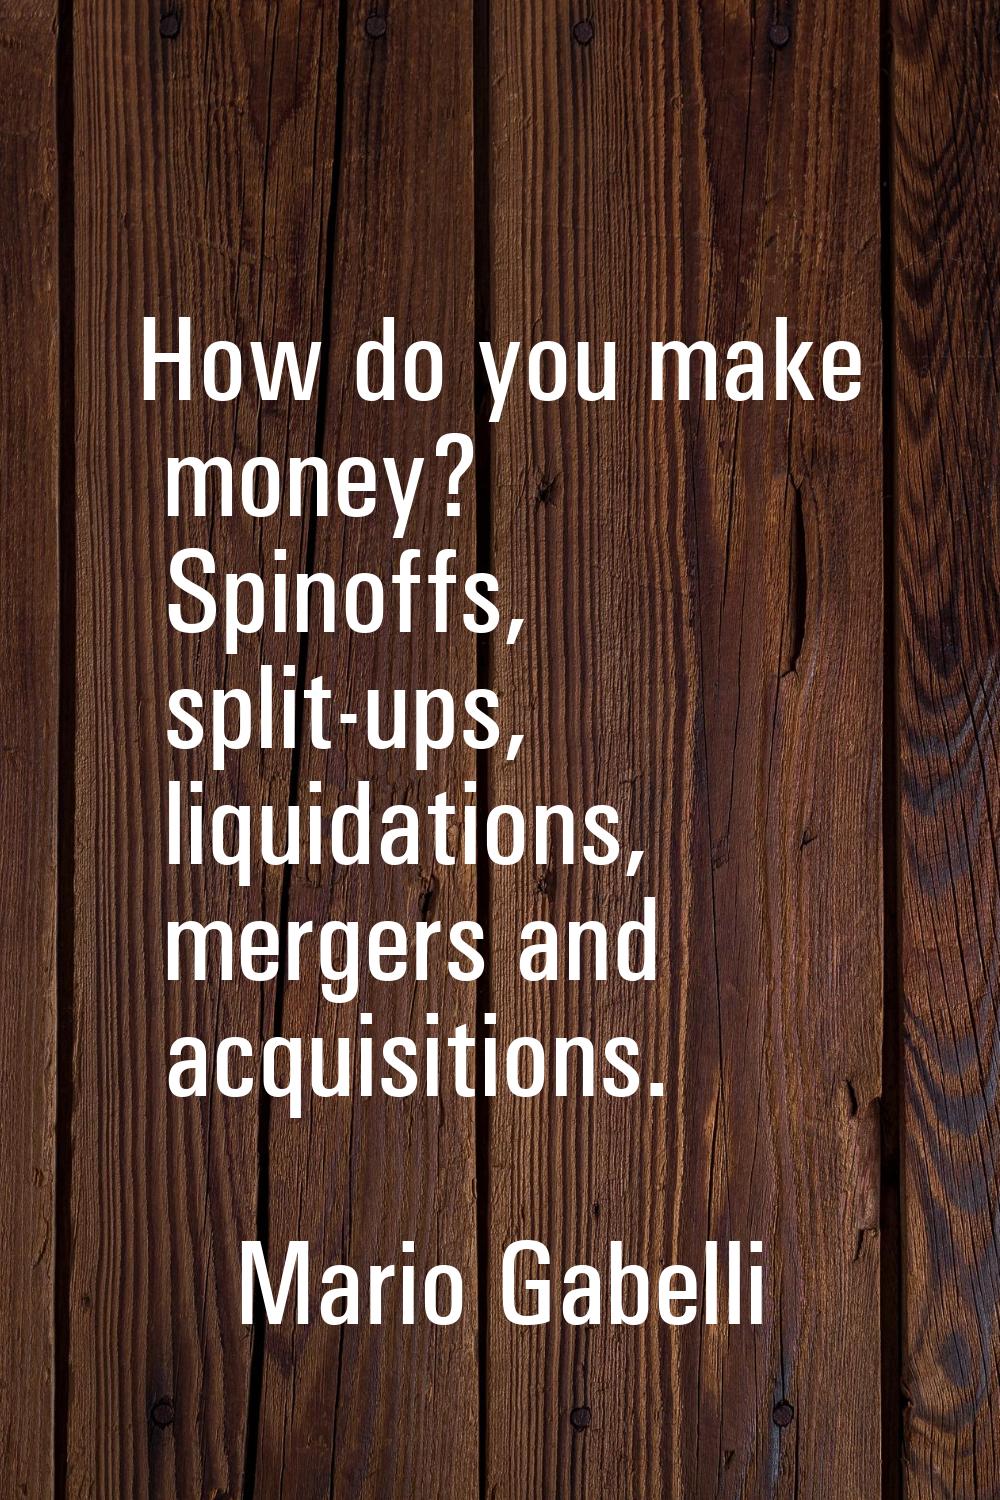 How do you make money? Spinoffs, split-ups, liquidations, mergers and acquisitions.